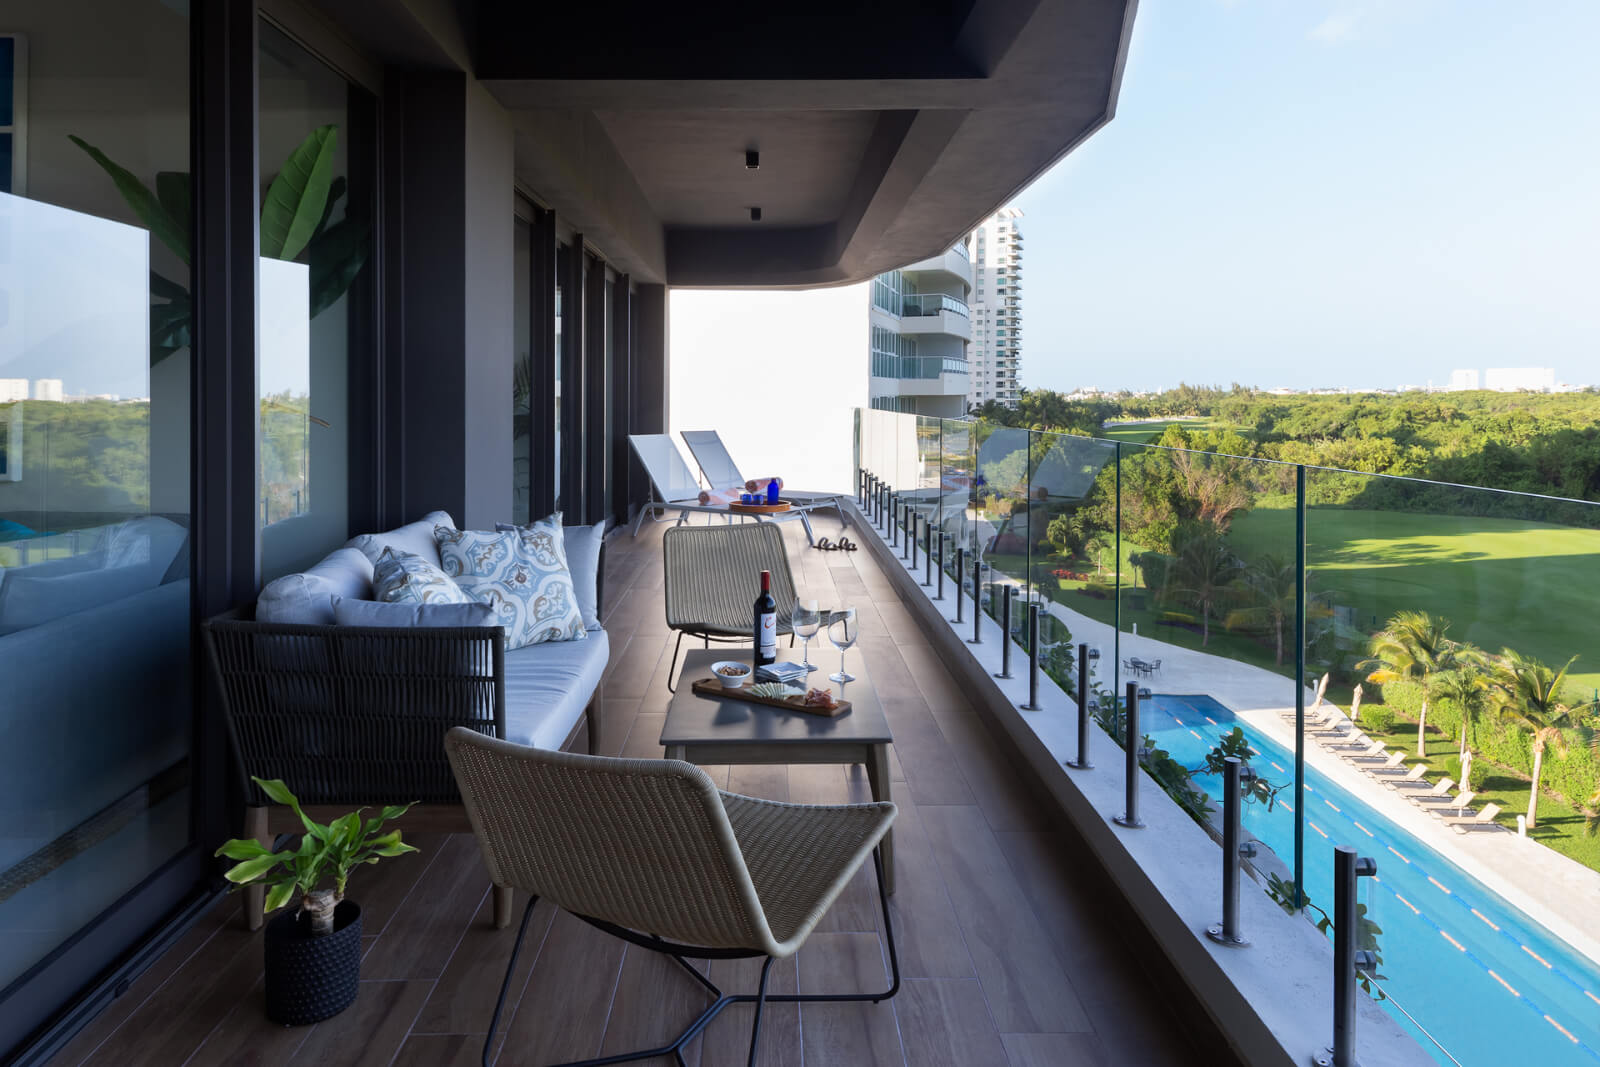 Penthouse with ocean view, private garden and terrace, has 4 bedrooms, private jacuzzi, roof top, TV room. In addition to amenities, pool